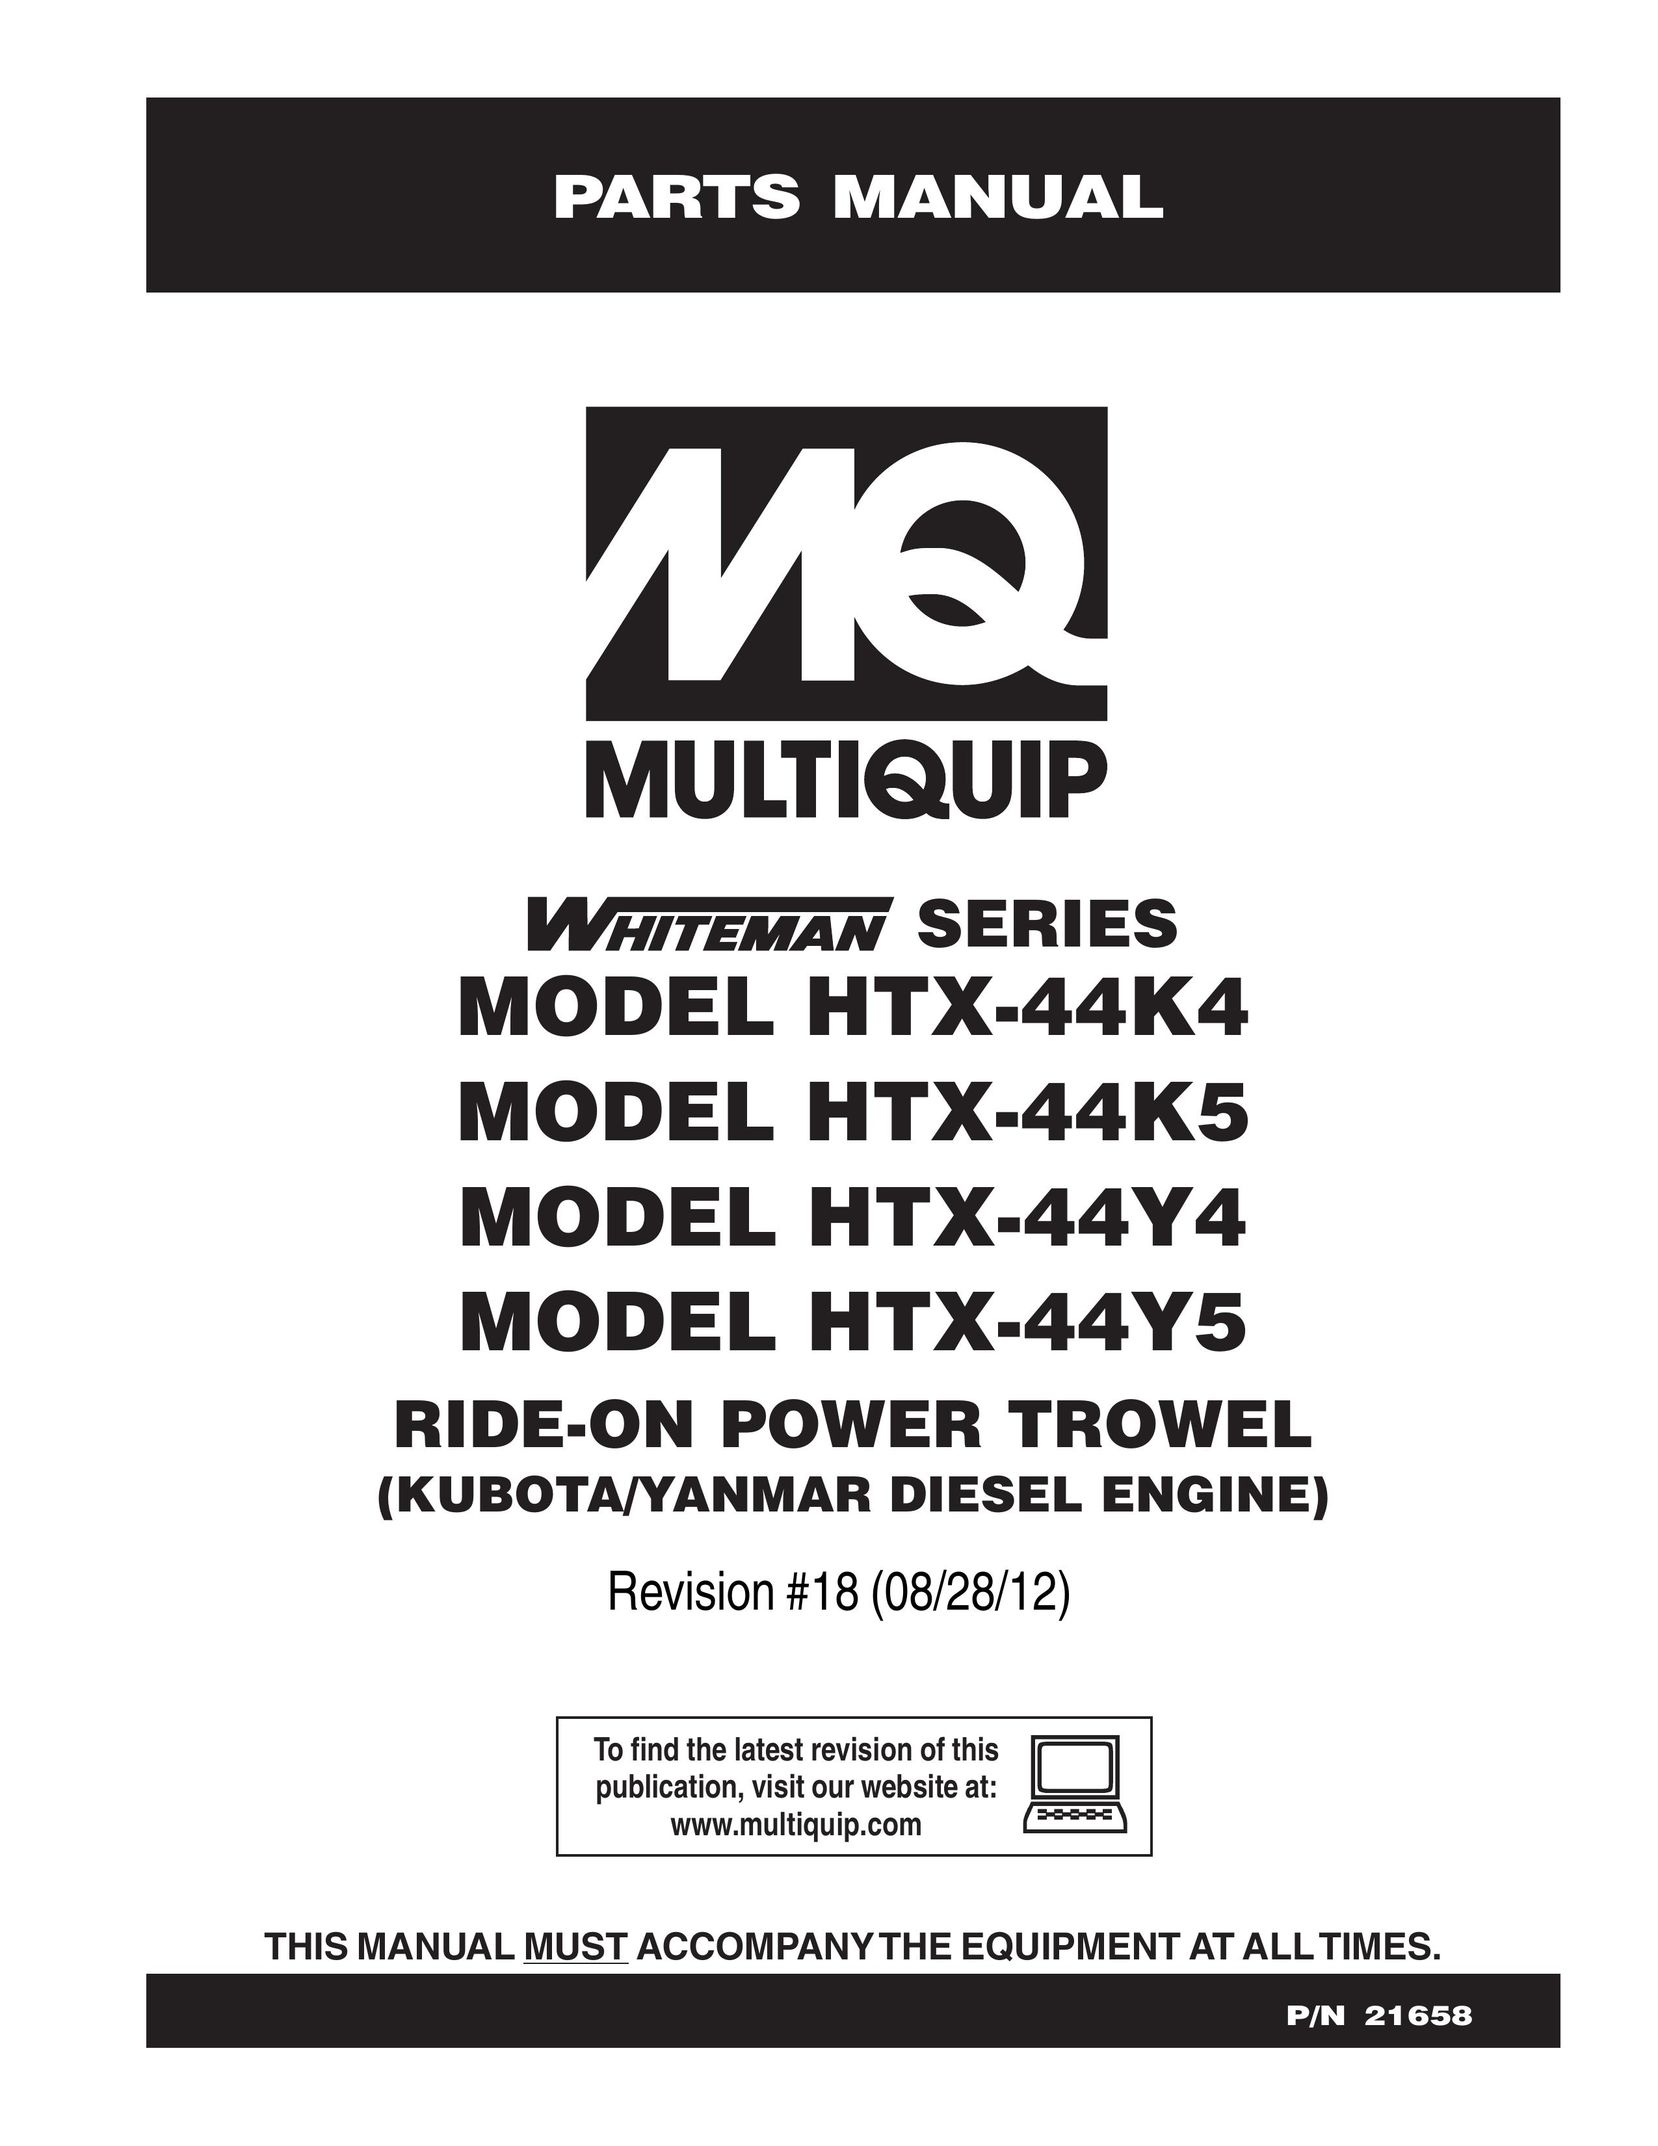 Multiquip HTX-44K5 Riding Toy User Manual